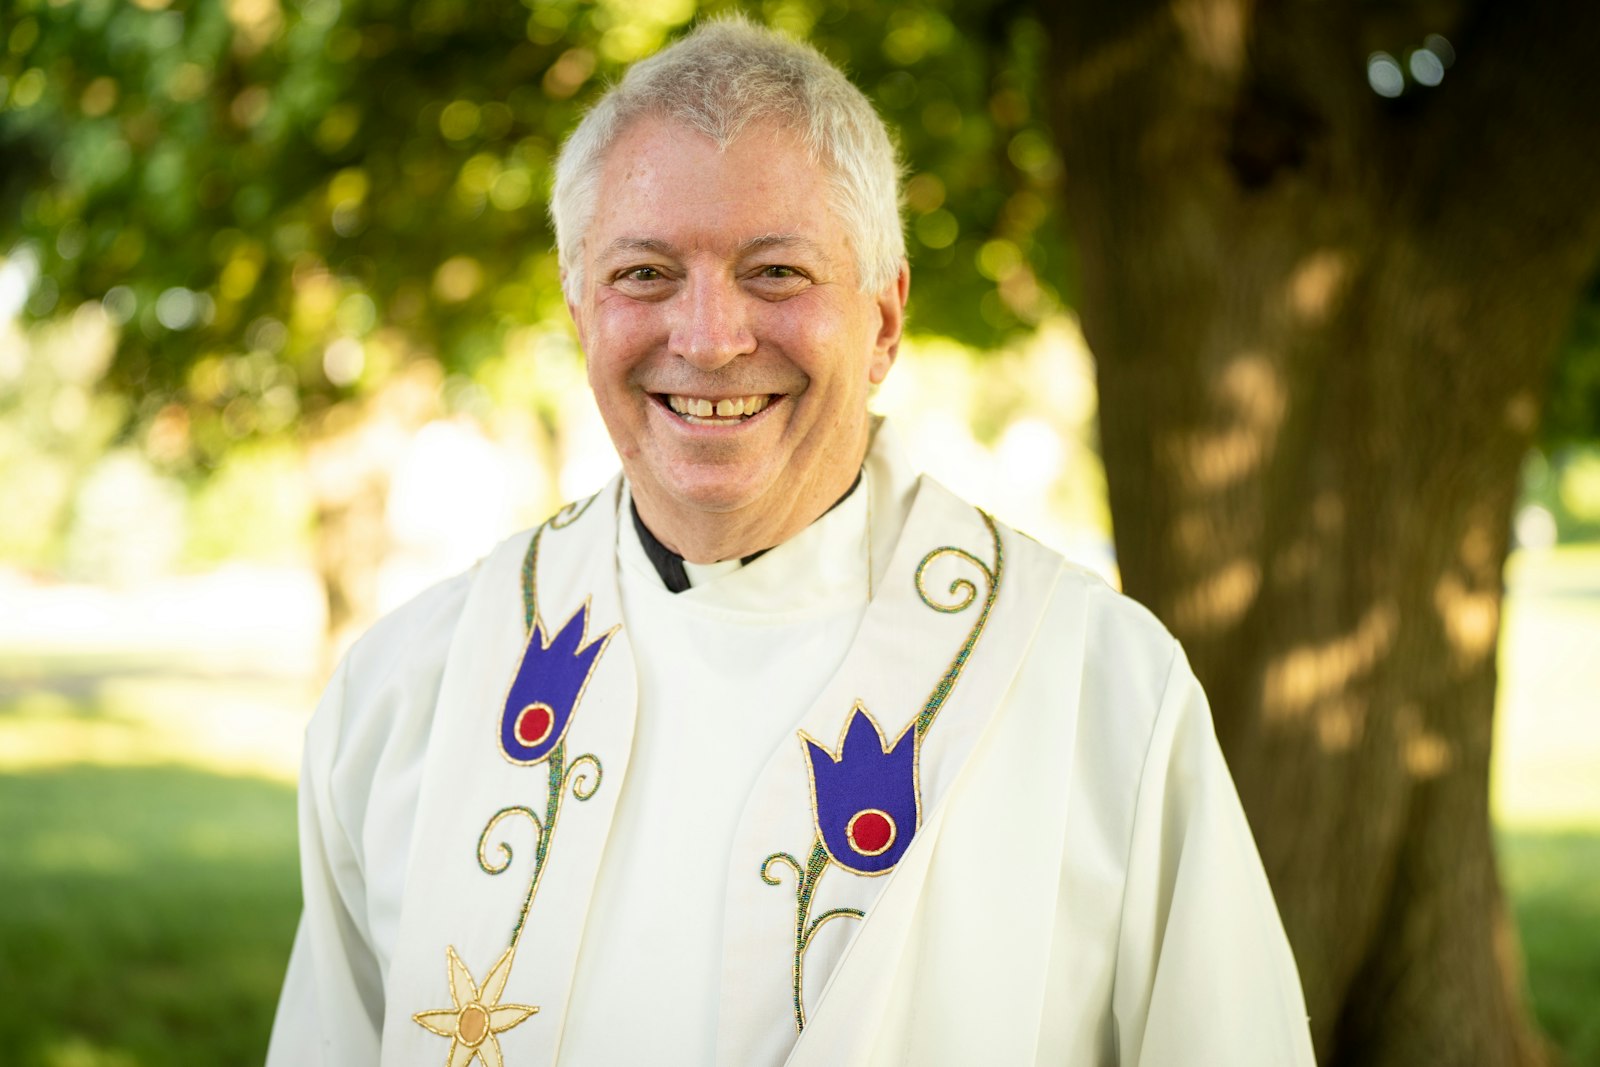 Fr. Charles Morris, professor at Madonna University and chaplain to the St. Kateri Circle, wears a stole made in Ontario commissioned in 1997 by the Ojibwe and Wyandot tribes for Native American ministry. The stole features beads woven into patterns that carry great significance in the Ojibwe and Wyandot communities.